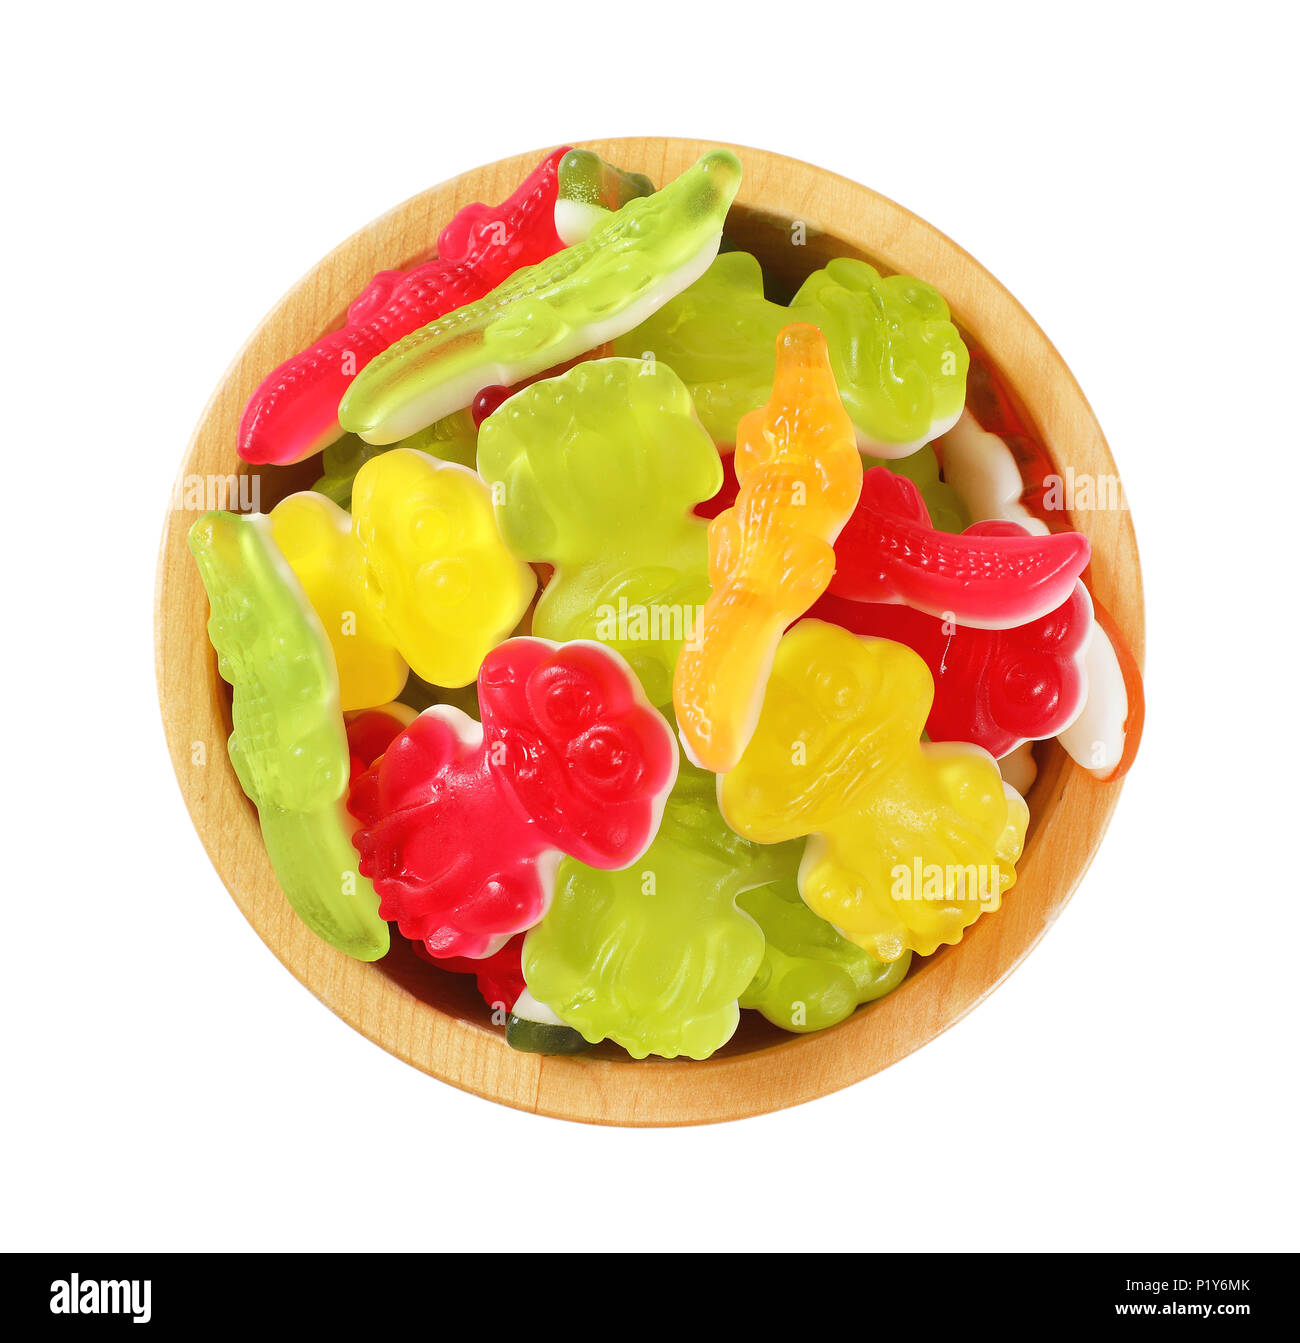 Gummi candy Cut Out Stock Images & Pictures - Alamy